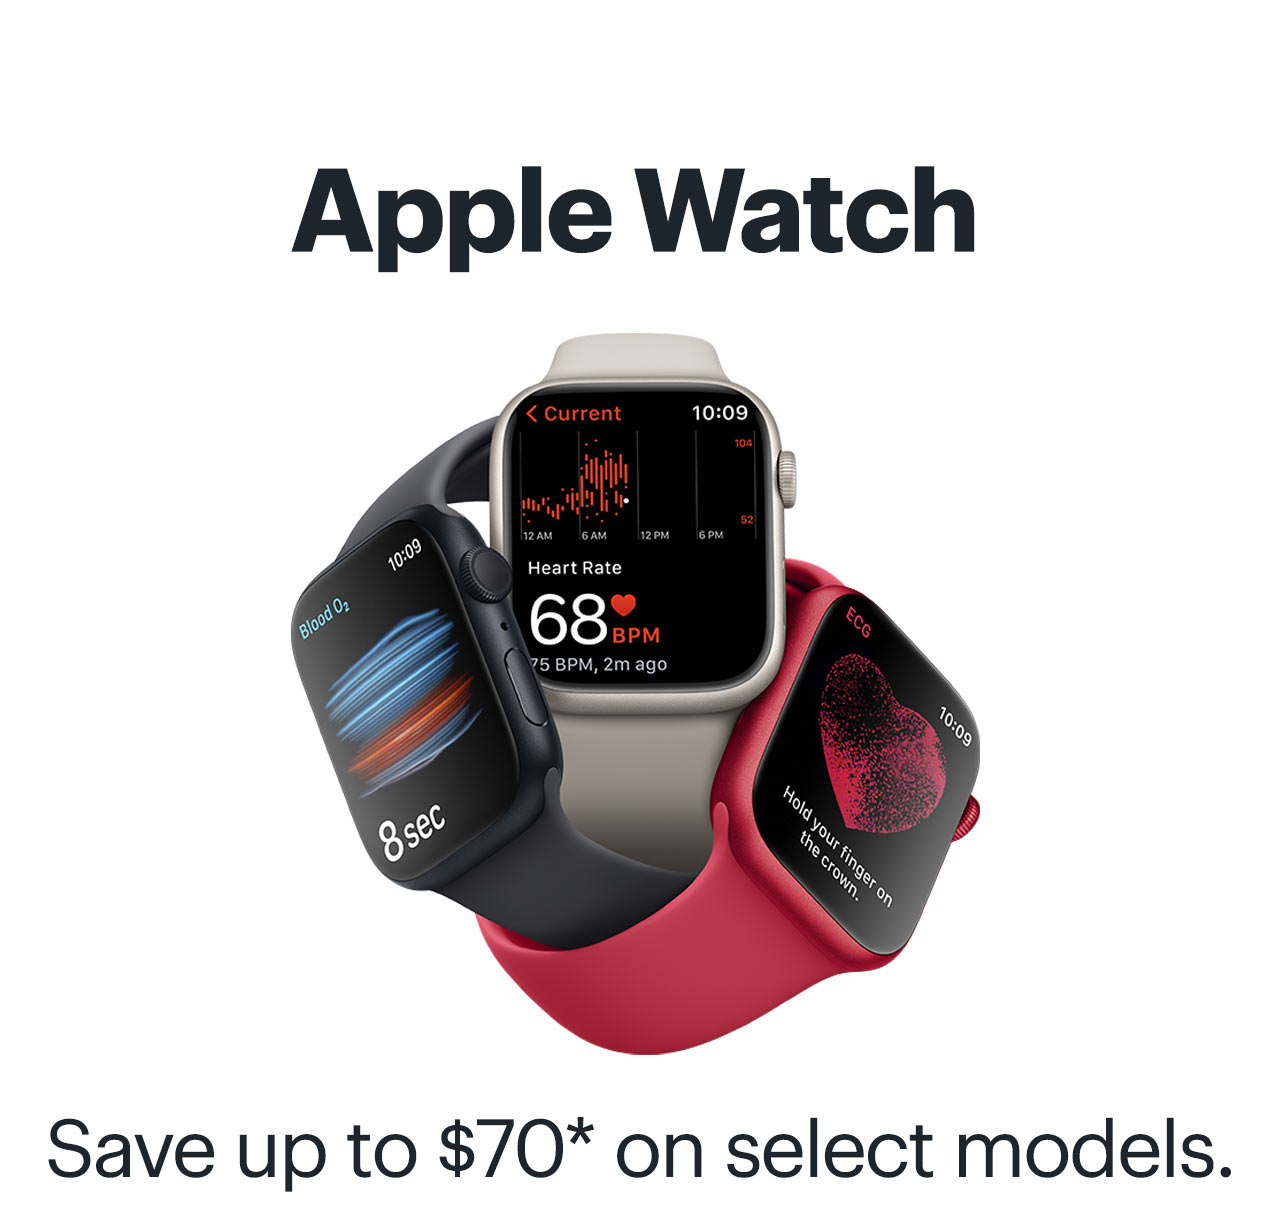 Apple Watch. Save up to $70 on select models. Reference disclaimer.